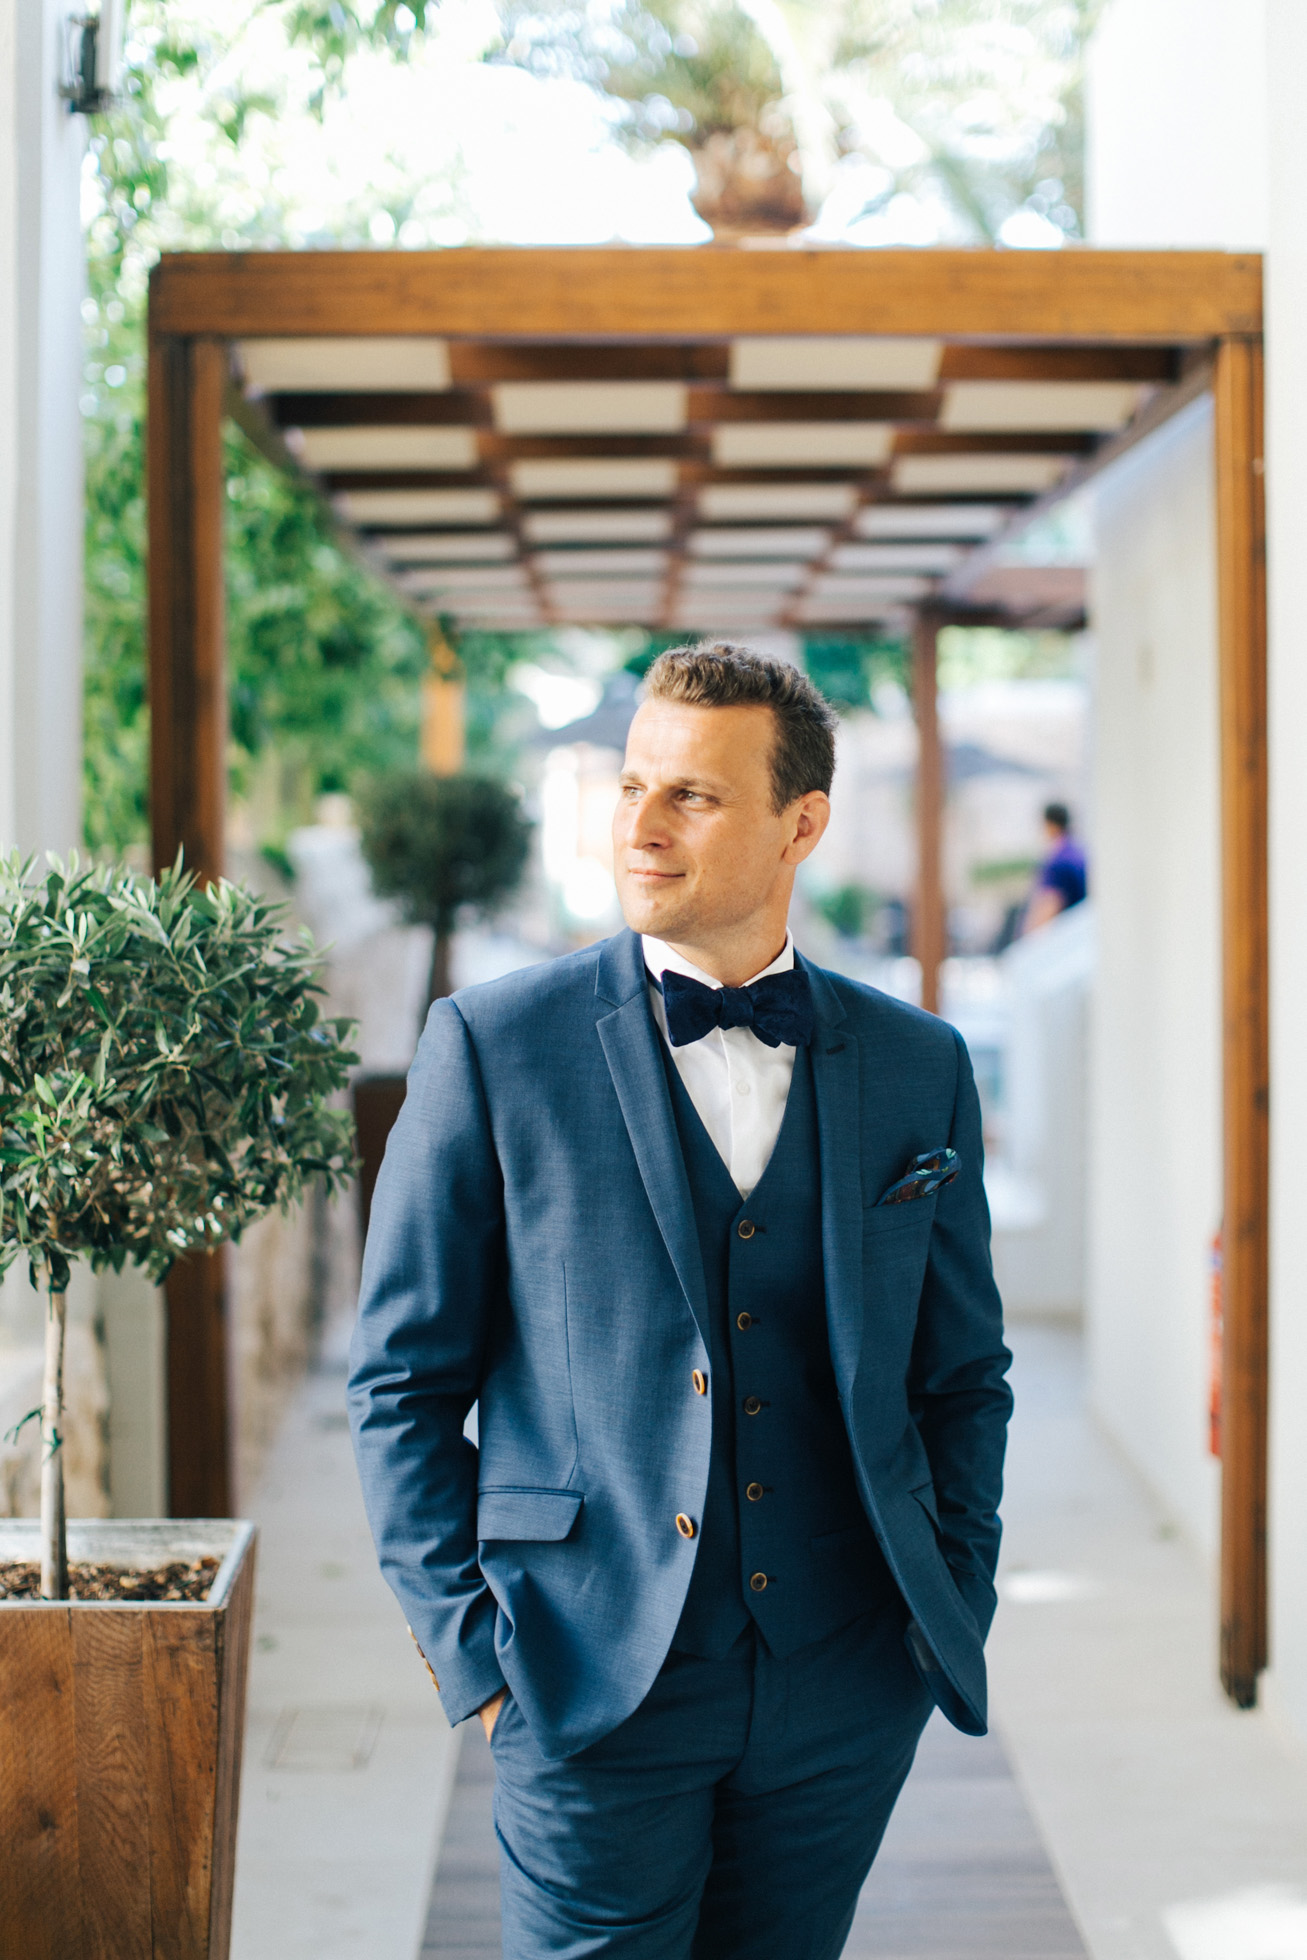 Portrait of an elegant modern groom on his wedding day in Crete posing for professional photographer.